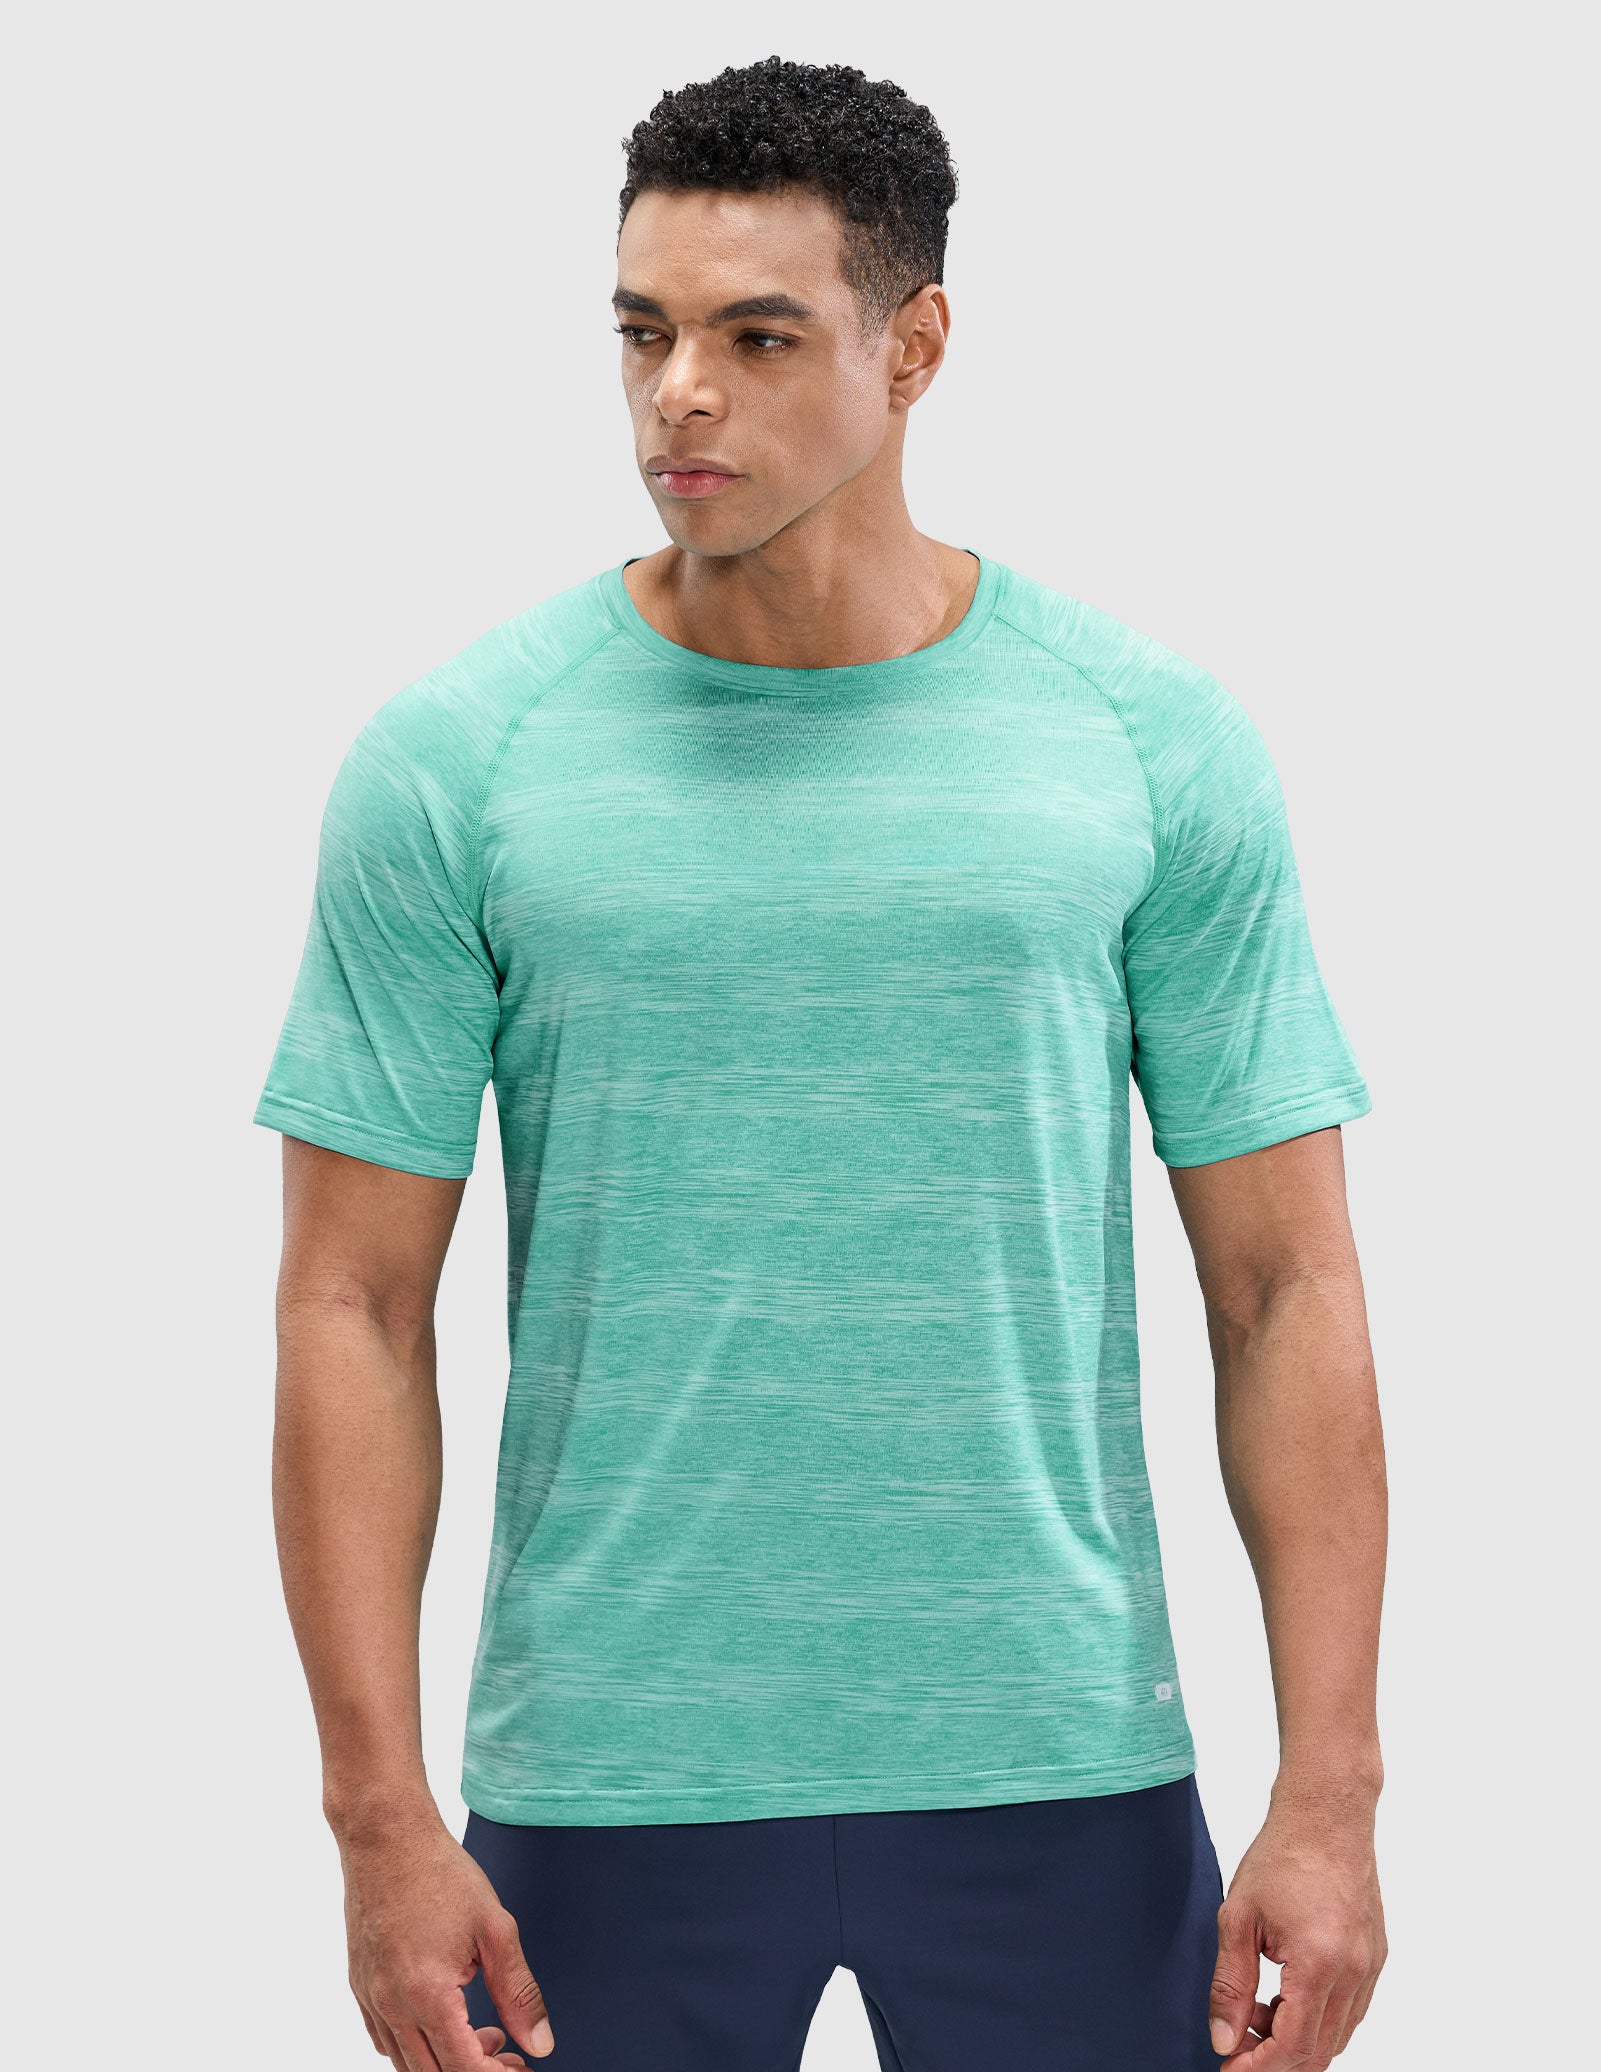 Men's Dry Fit Workout T-Shirts Athletic Running Tee